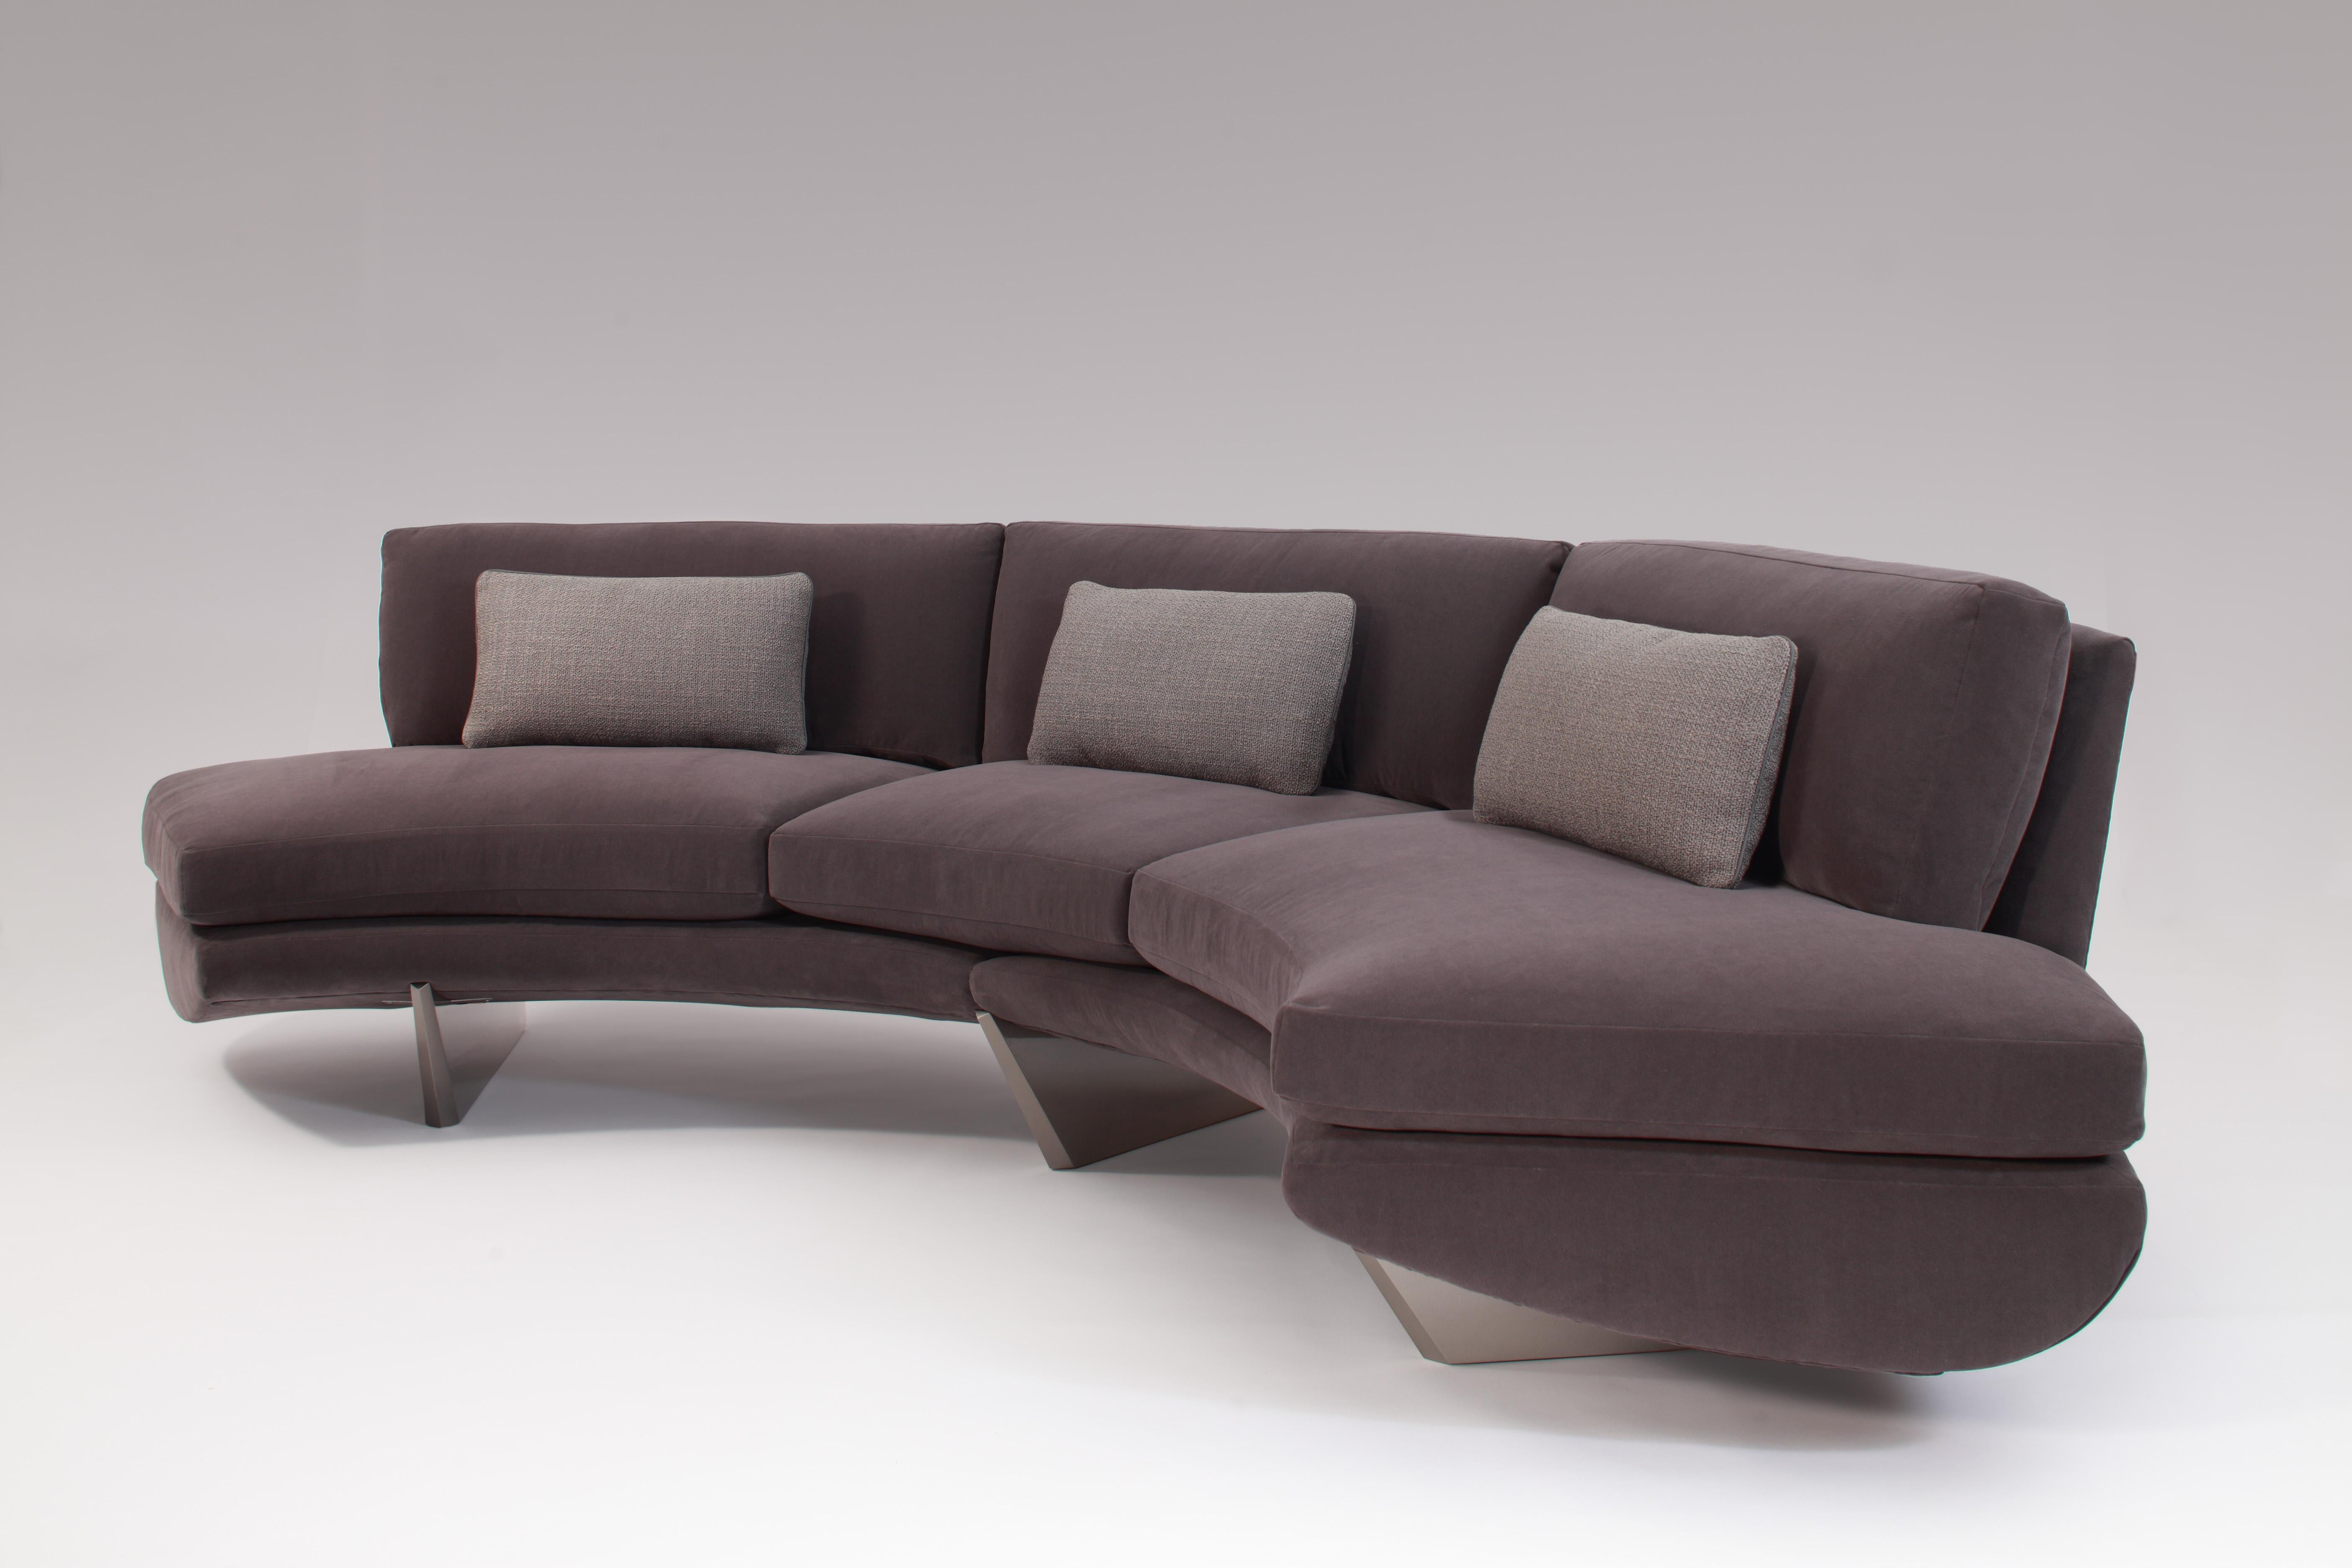 A sweeping revision of the conventional sectional, this fabulous piece by Georgis & Mirgorodsky curls gracefully into a semicircle, and rests on a series of well-spaced legs. While only loosely inspired by its namesake—the sofa's legs resemble the